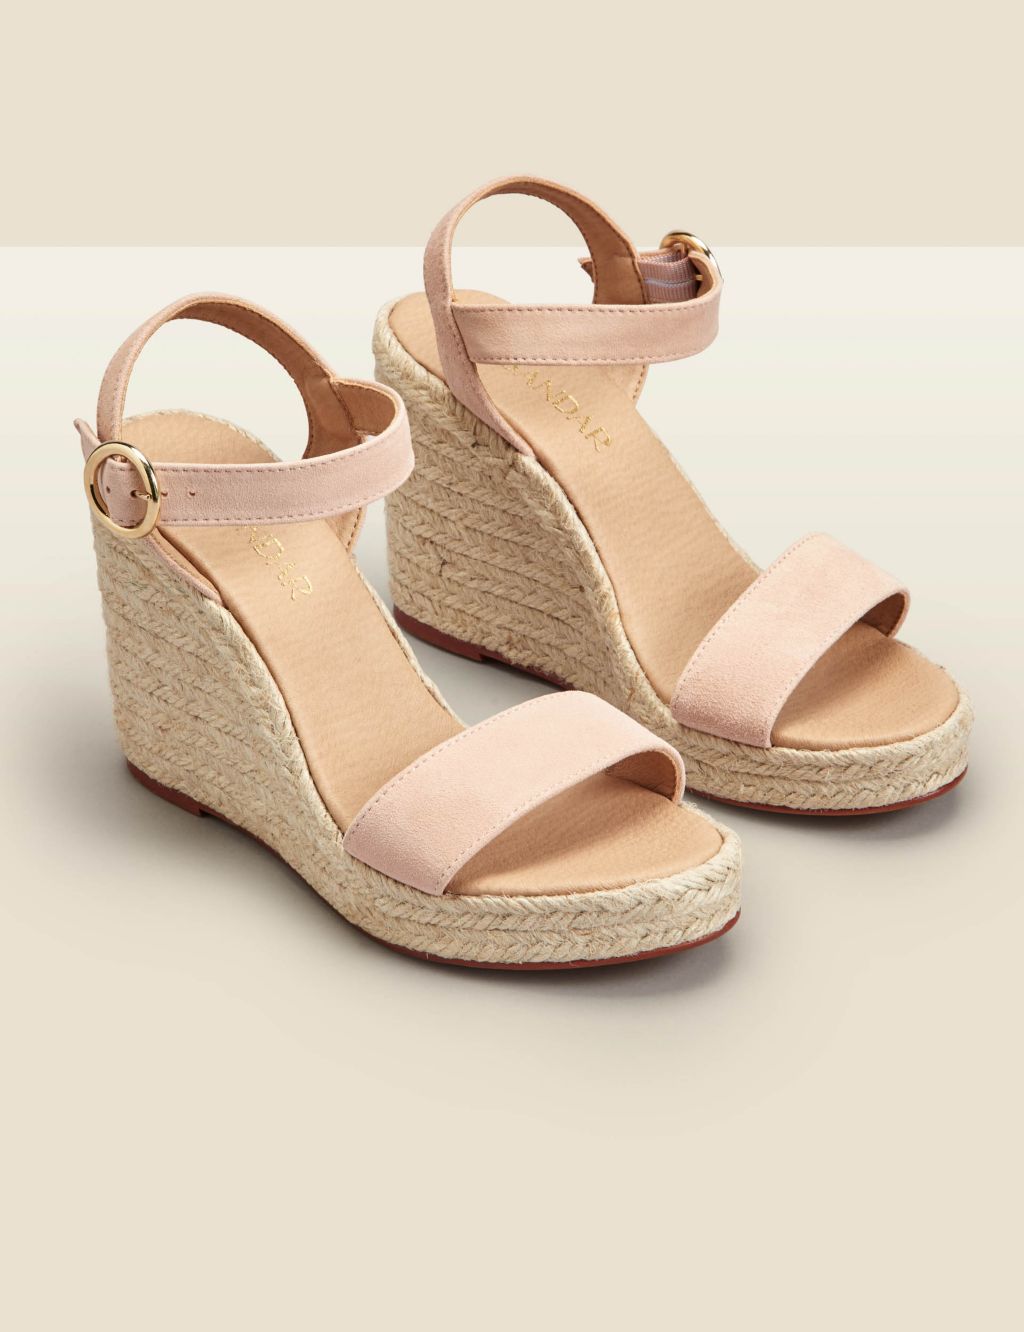 Suede Buckle Ankle Strap Wedge Espadrilles image 2